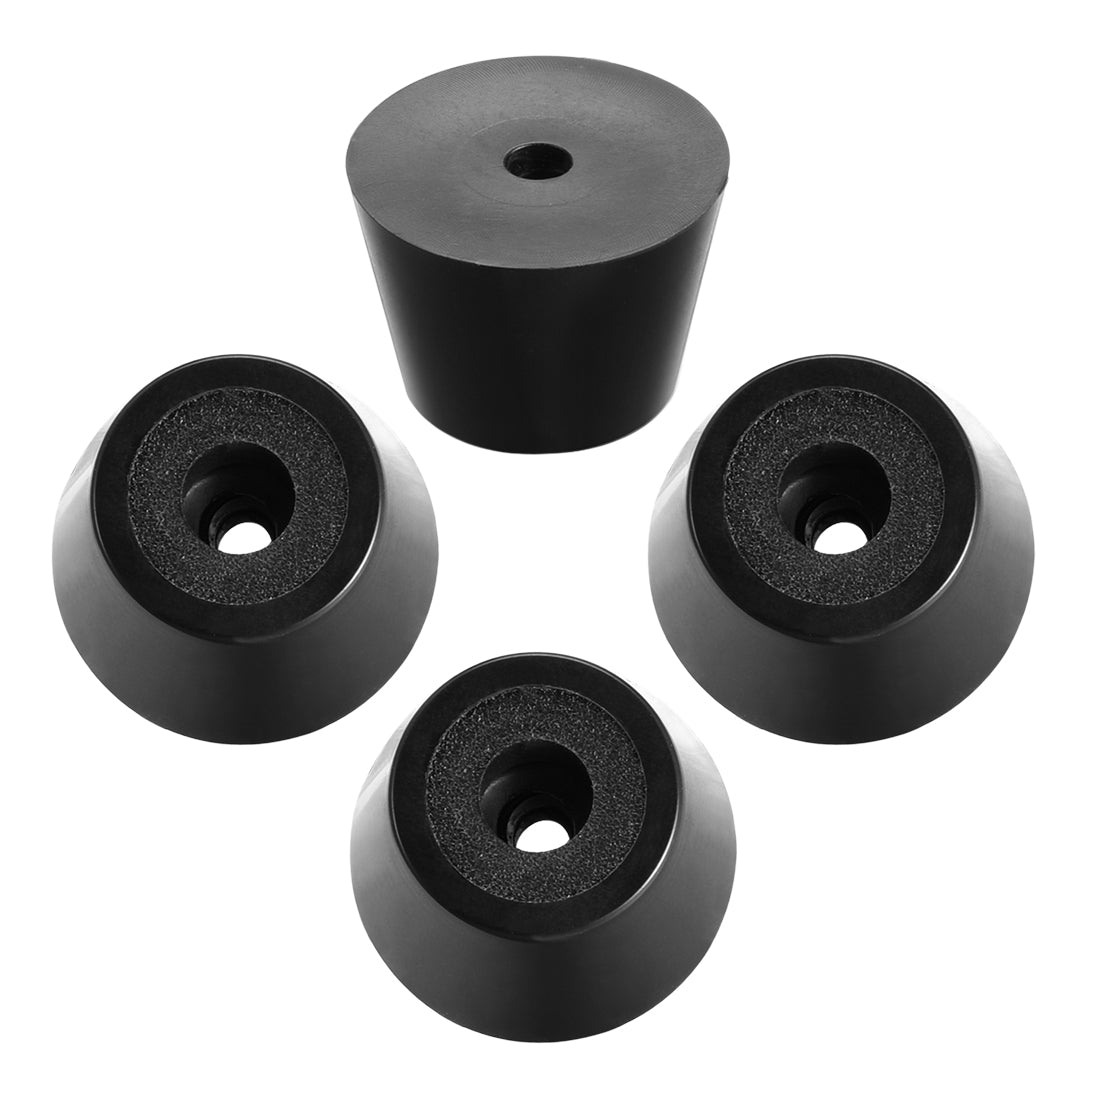 uxcell Uxcell Rubber Feet Bumpers Pads D29x21xH20mm Black 4pcs